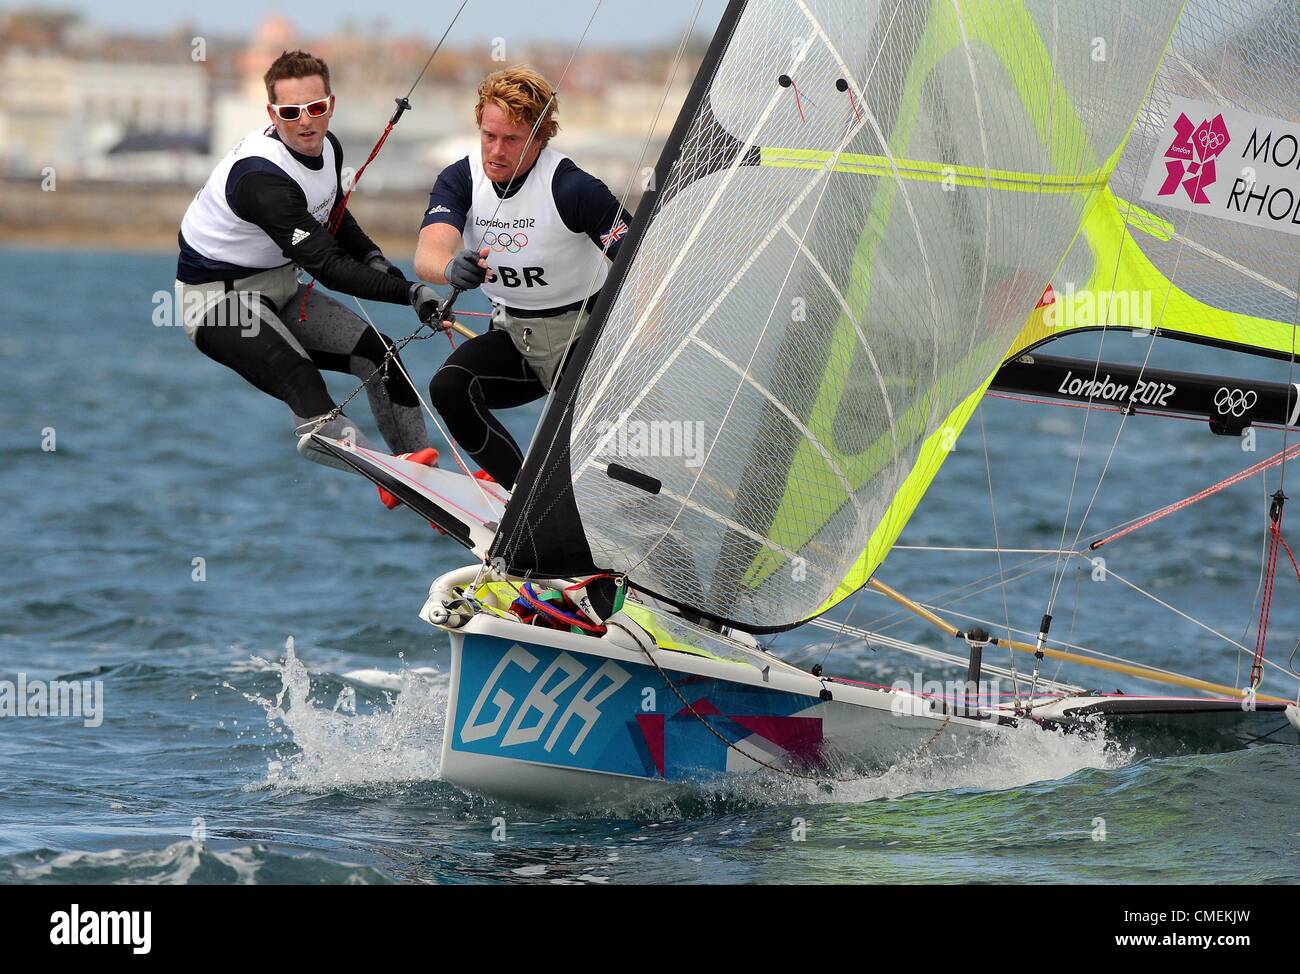 Olympic Sailing, action during the London 2012 Olympic Games at the Weymouth & Portland Venue, Dorset, Britain, UK.  Stevie Morrison and Ben Rhodes compete in the Men's 49er Sailing July 30, 2012 PICTURE: DORSET MEDIA SERVICE Stock Photo